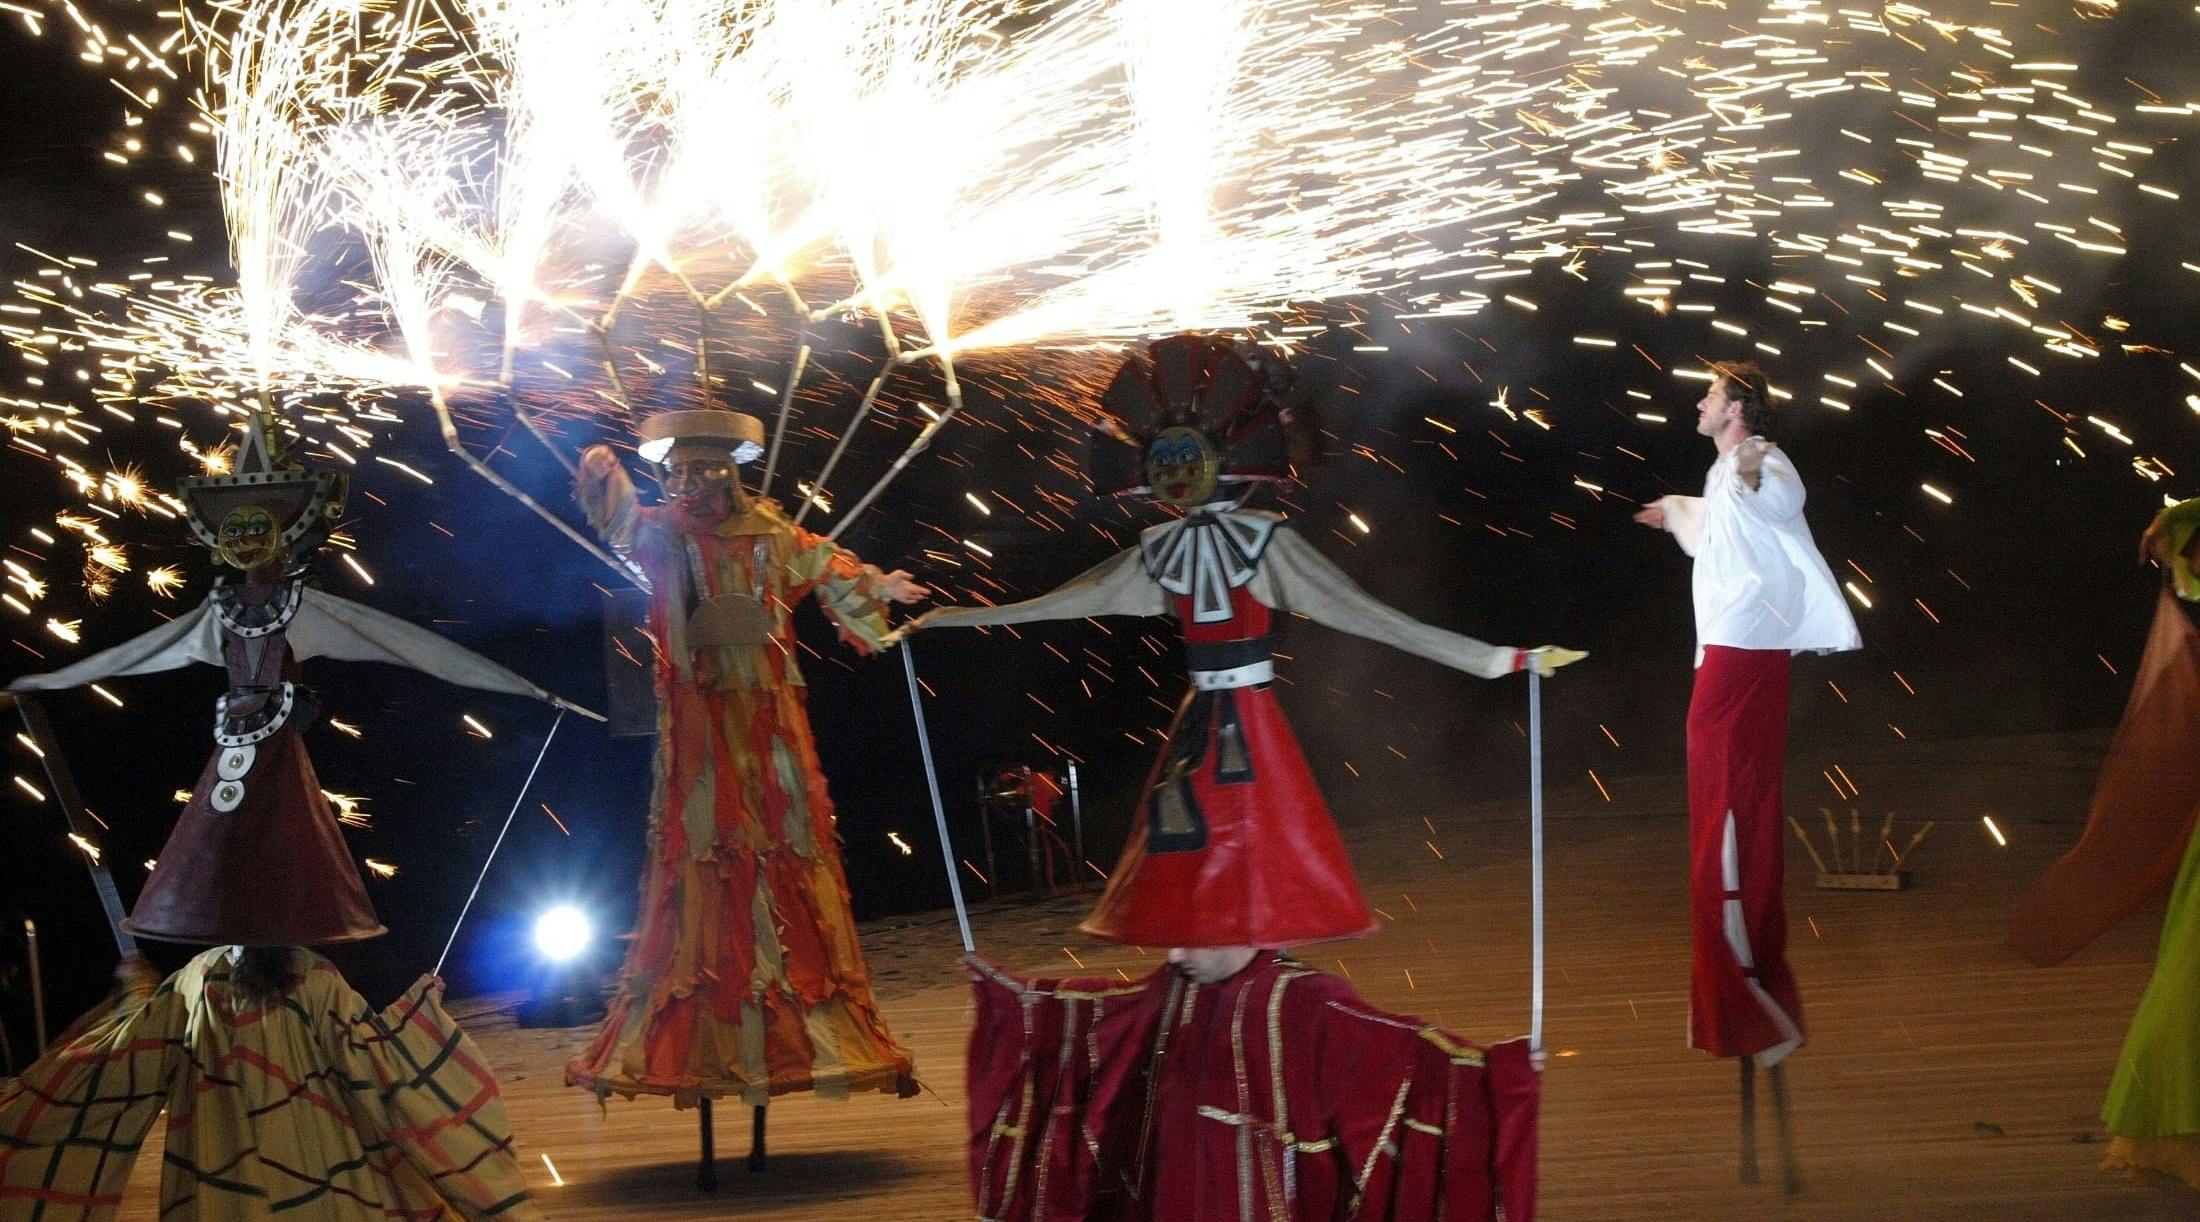 Show with fire and stilt walkers